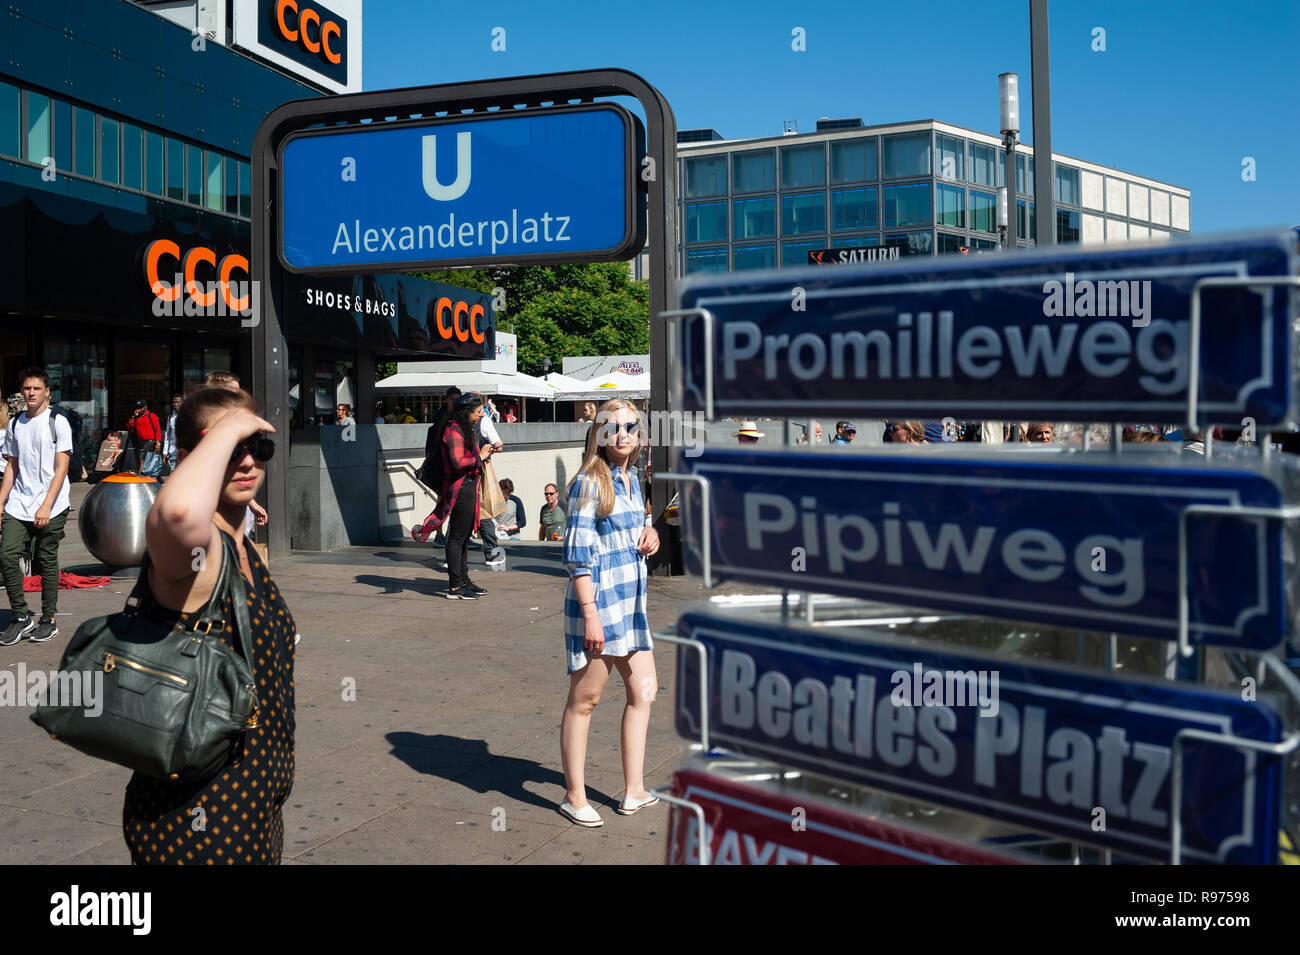 07.06.2018, Berlin, Germany, Europe - People at the entrance to the underground station at Alexanderplatz Square in Berlin Mitte. Stock Photo